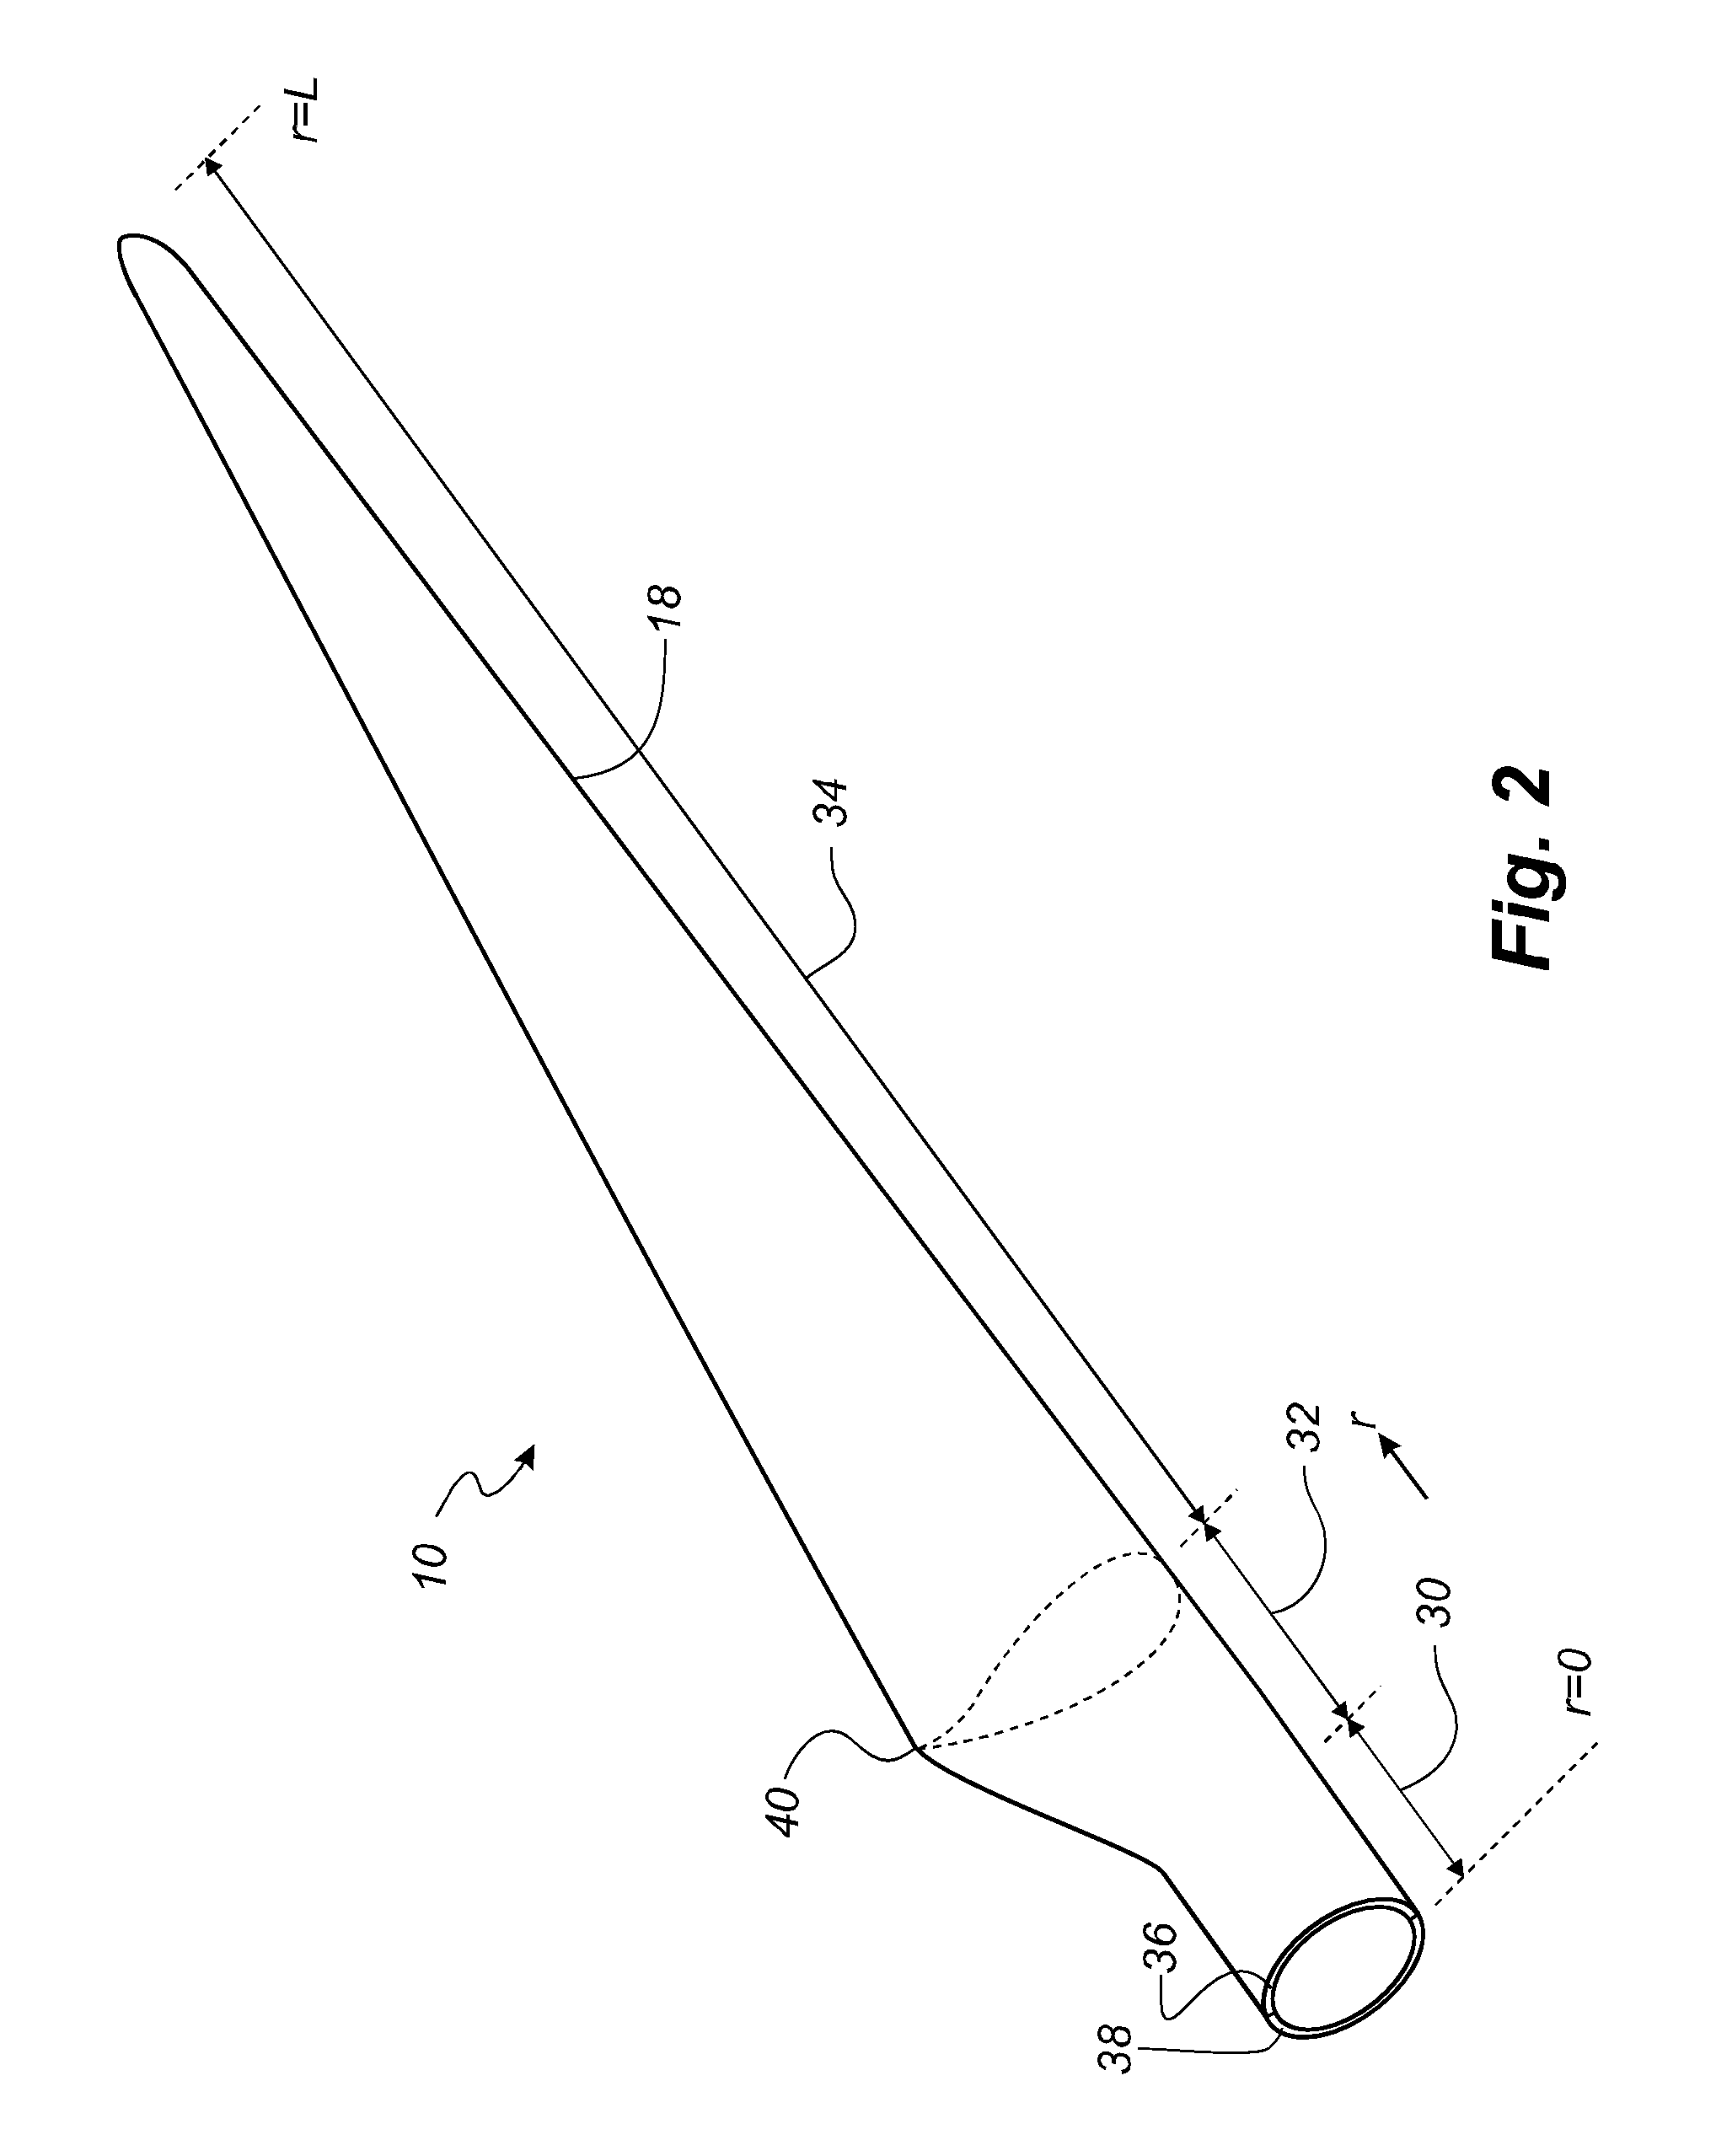 A wind turbine blade comprising an aerodynamic blade shell with recess and pre-manufactured spar cap